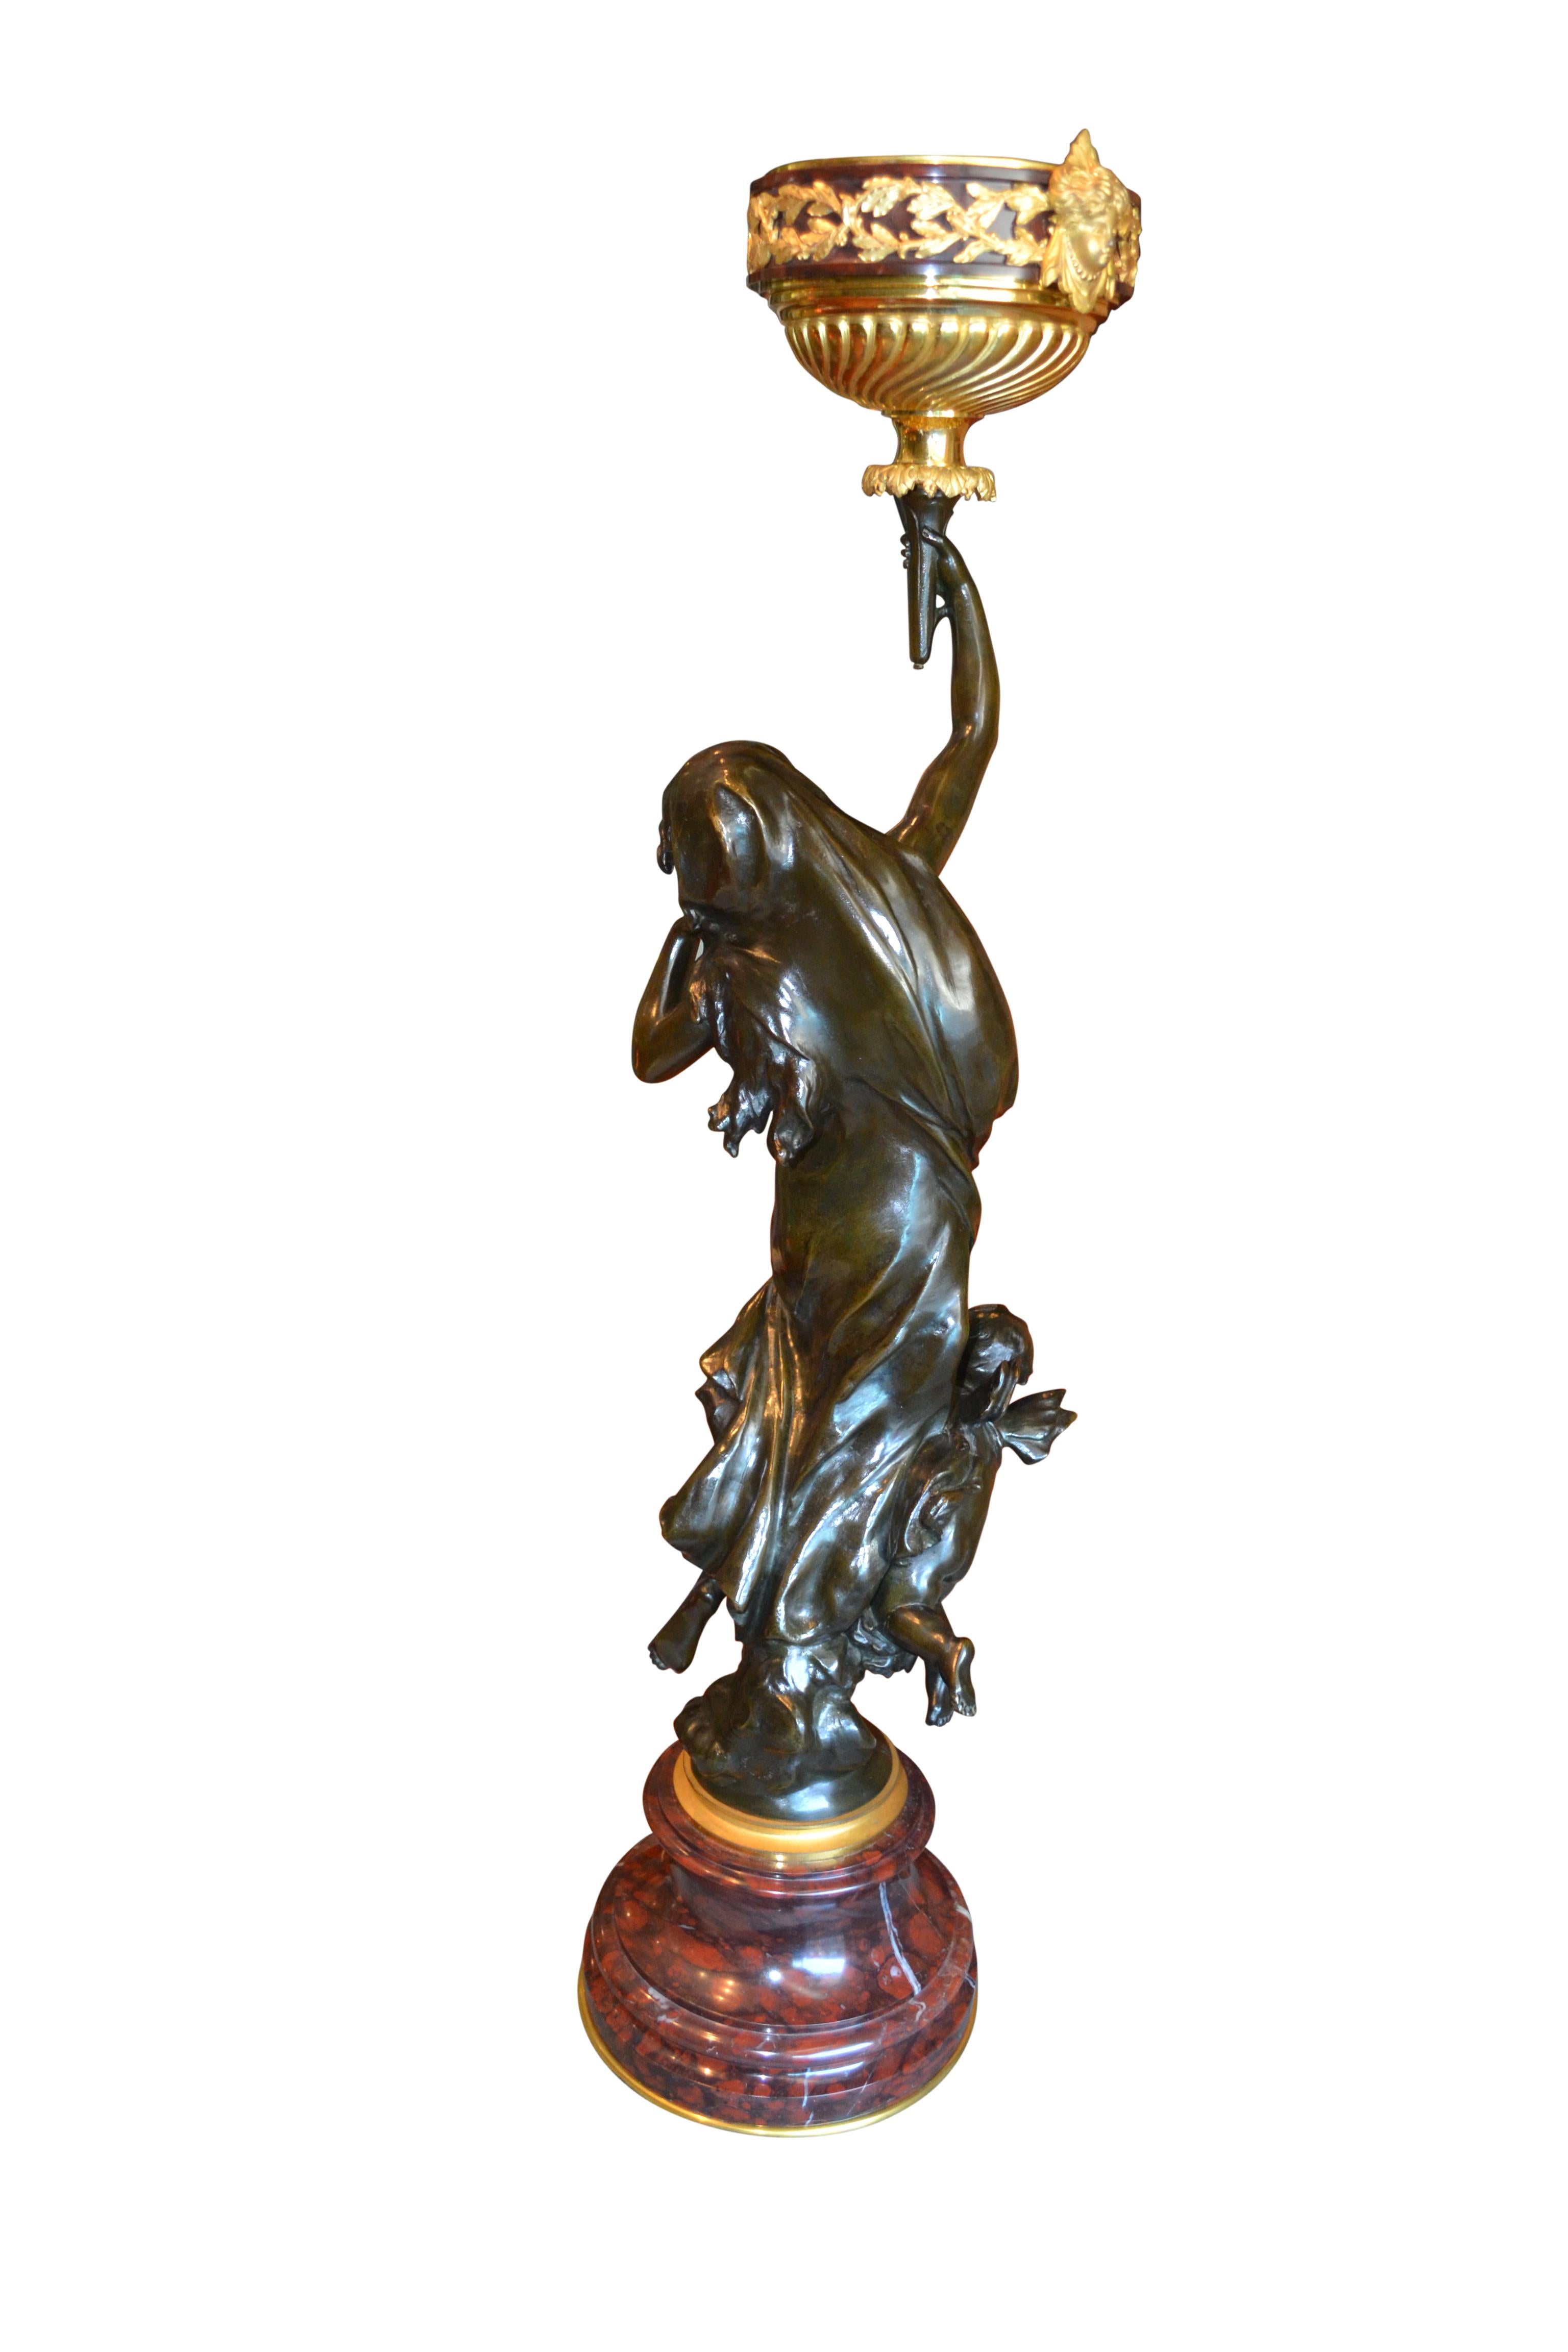  Oil Lamp Featuring a Mathurin Moreau Bronze Statue of  a Nymph and Putto   In Good Condition For Sale In Vancouver, British Columbia